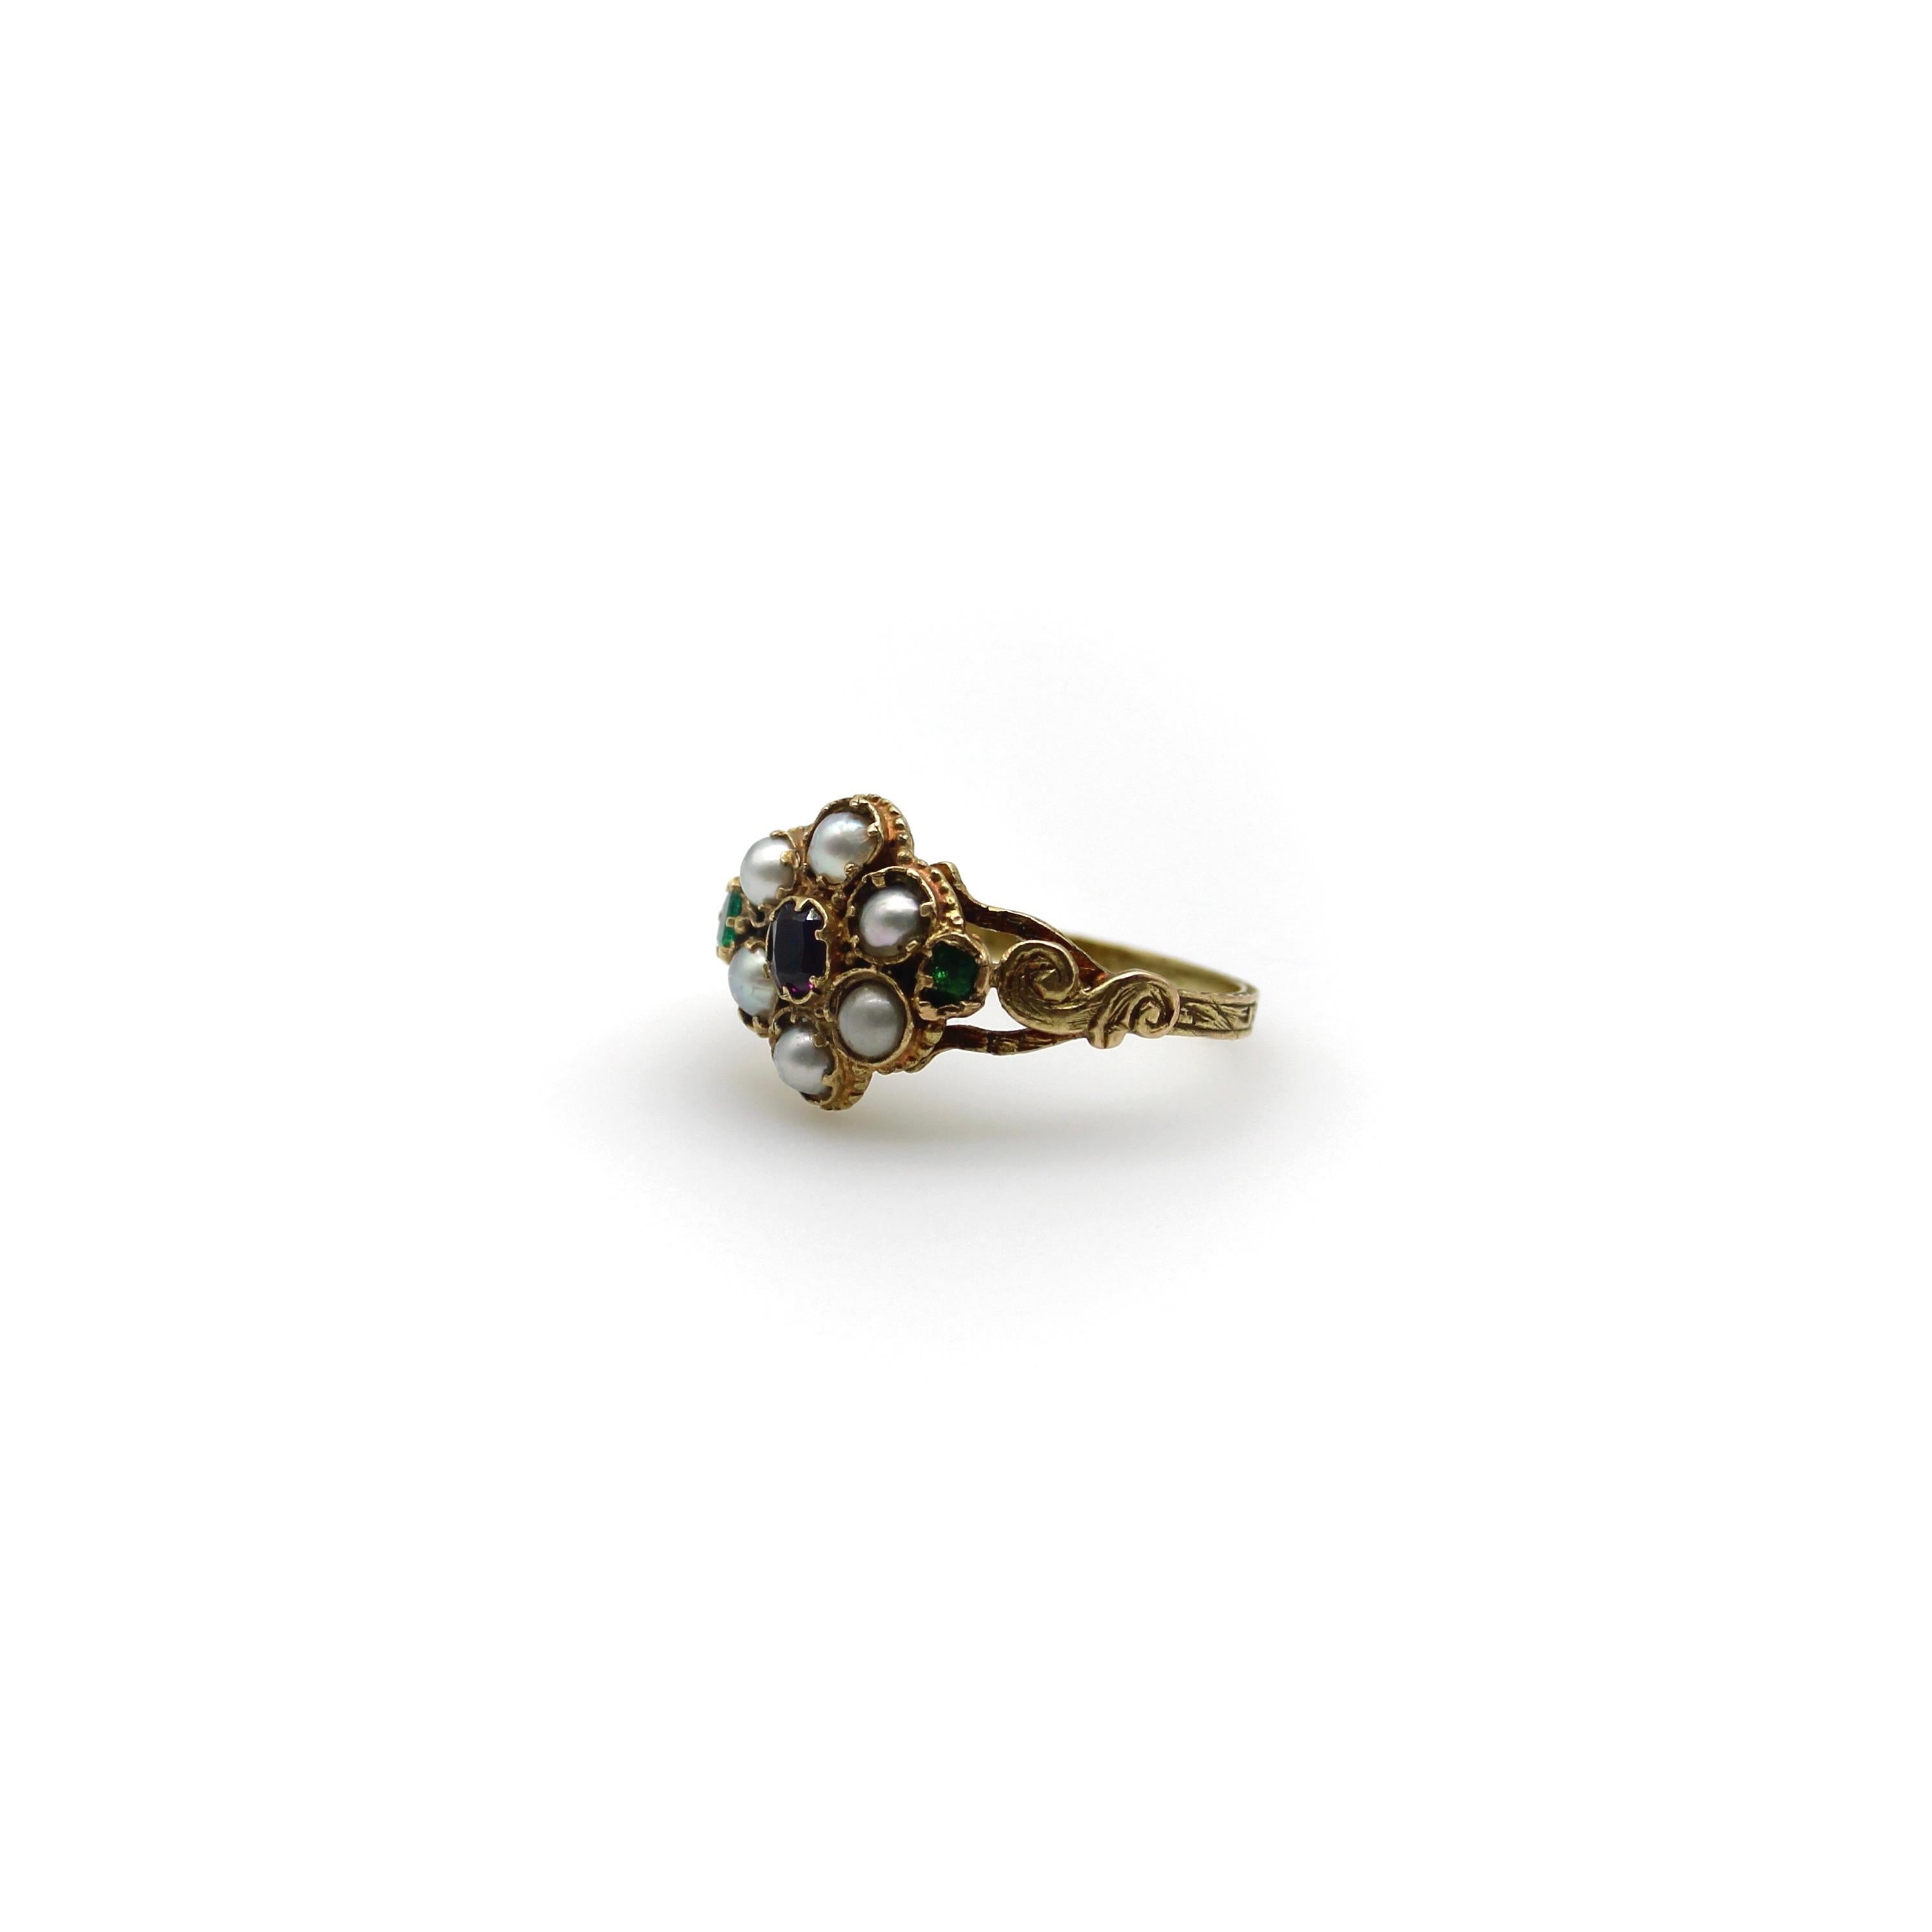 Here at Kirsten’s Corner, we have a sweet spot for these early Victorian flower rings. This 15k gold ring is reminiscent of a Forget-Me-Not flower, a popular motif in the Victorian era. The pearl flower petals in the ring represent tears and capture